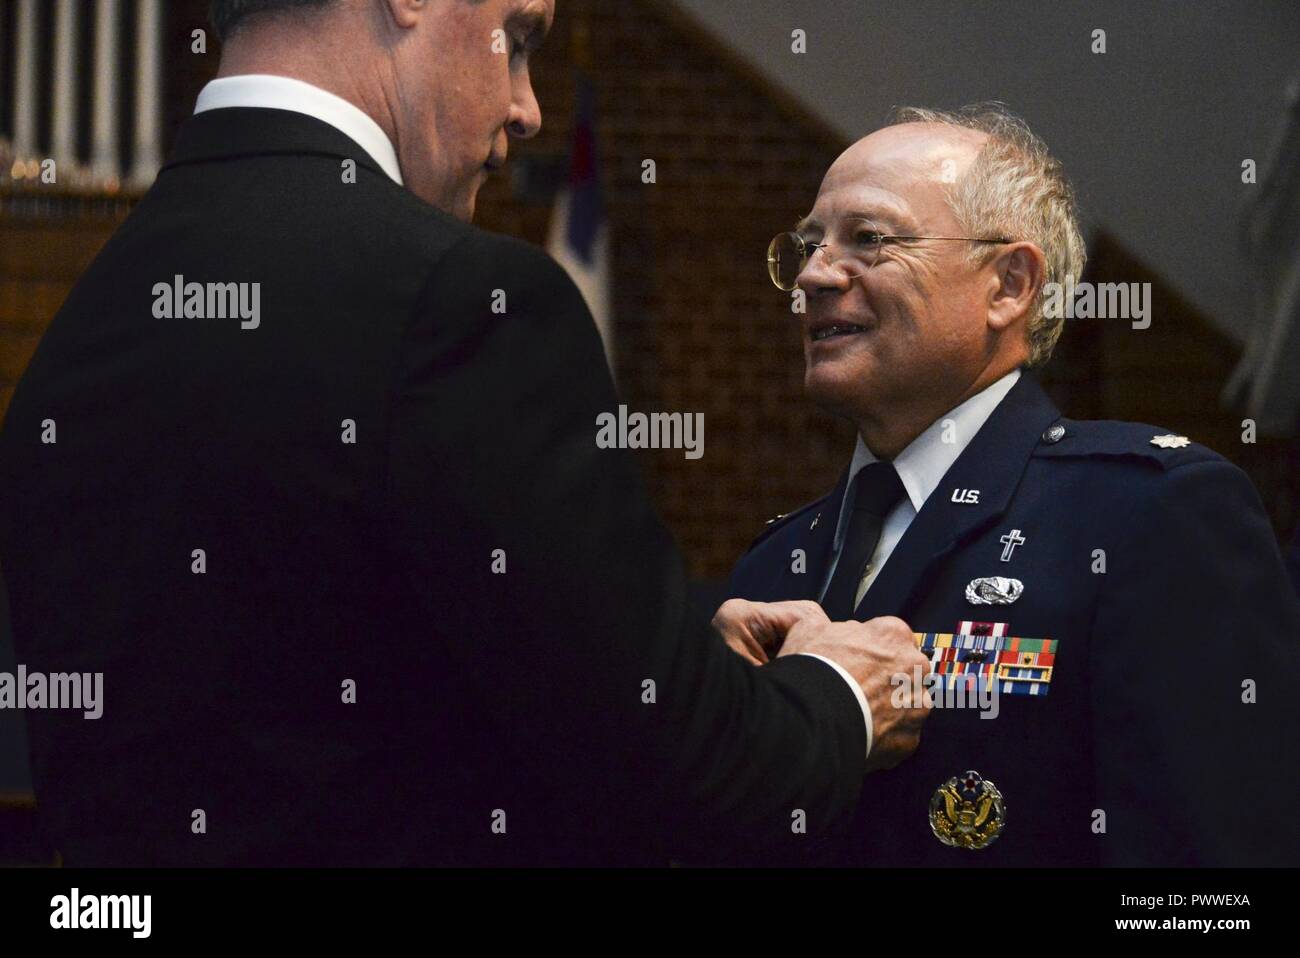 John A. Weida, Director of Policy, Programs & Strategy, International Affairs, Office of the Under Secretary of the Air Force (International Affairs), places a Meritorious Service medal onto Lt. Colonel James M. Glass, 70th Intelligence, Surveillance, and Reconnaissance Wing, senior Air Force chaplain, during Glass’ retirement ceremony July 5, 2017 Bowie, Md. Glass received his commission from the US Air Force Academy in 1977. He served as a Communications Maintenance Officer until he separated from the Air Force in May 1982. Glass then re-entered the Air Force as a chaplain in March 1998. Stock Photo